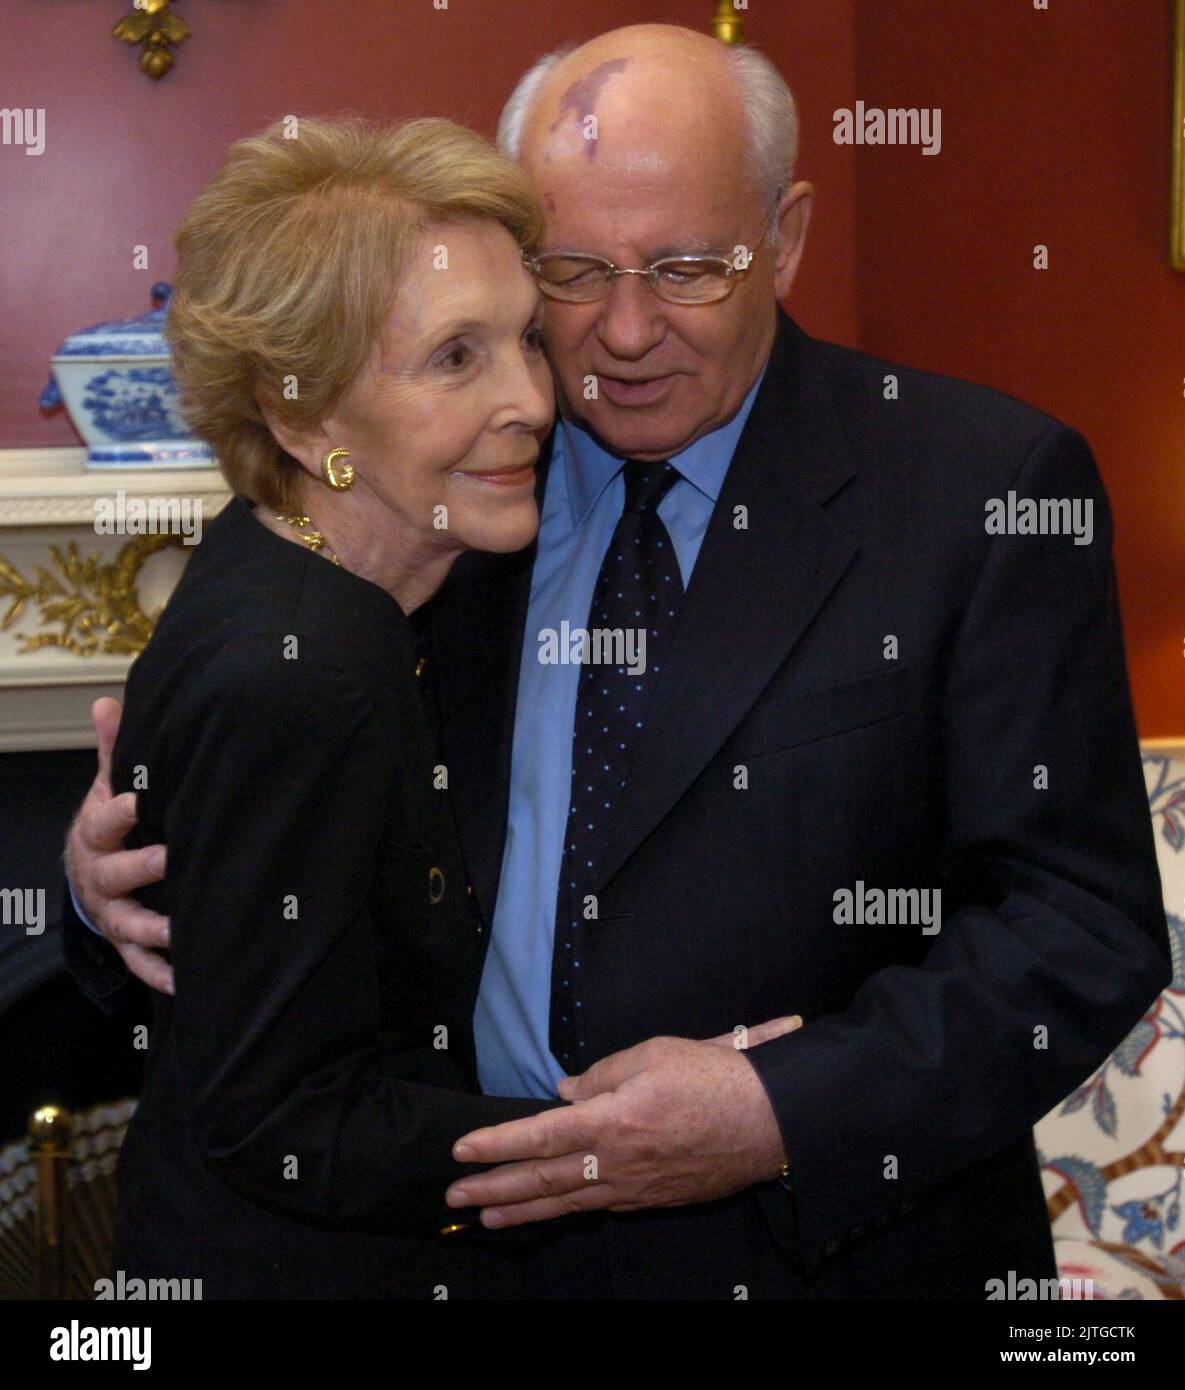 Washington, USA. 09th June, 2004. KRT US NEWS STORY SLUGGED: REAGAN KRT PHOTOGRAPH BY PETE SOUZA/RONALD REAGAN PRESIDENTIAL FOUNDATION (June 10) WASHINGTON, DC - Former Soviet General Secretary Mikhail Gorbachev embraces Nancy Reagan during their visit at the Blair House in Washington, DC on June 10, 2004. Mrs. Reagan received condolences from several former world leaders on Thursday and dine with President and Mrs. Bush tonight. (Photo by smd) 2004 Credit: Sipa USA/Alamy Live News Stock Photo